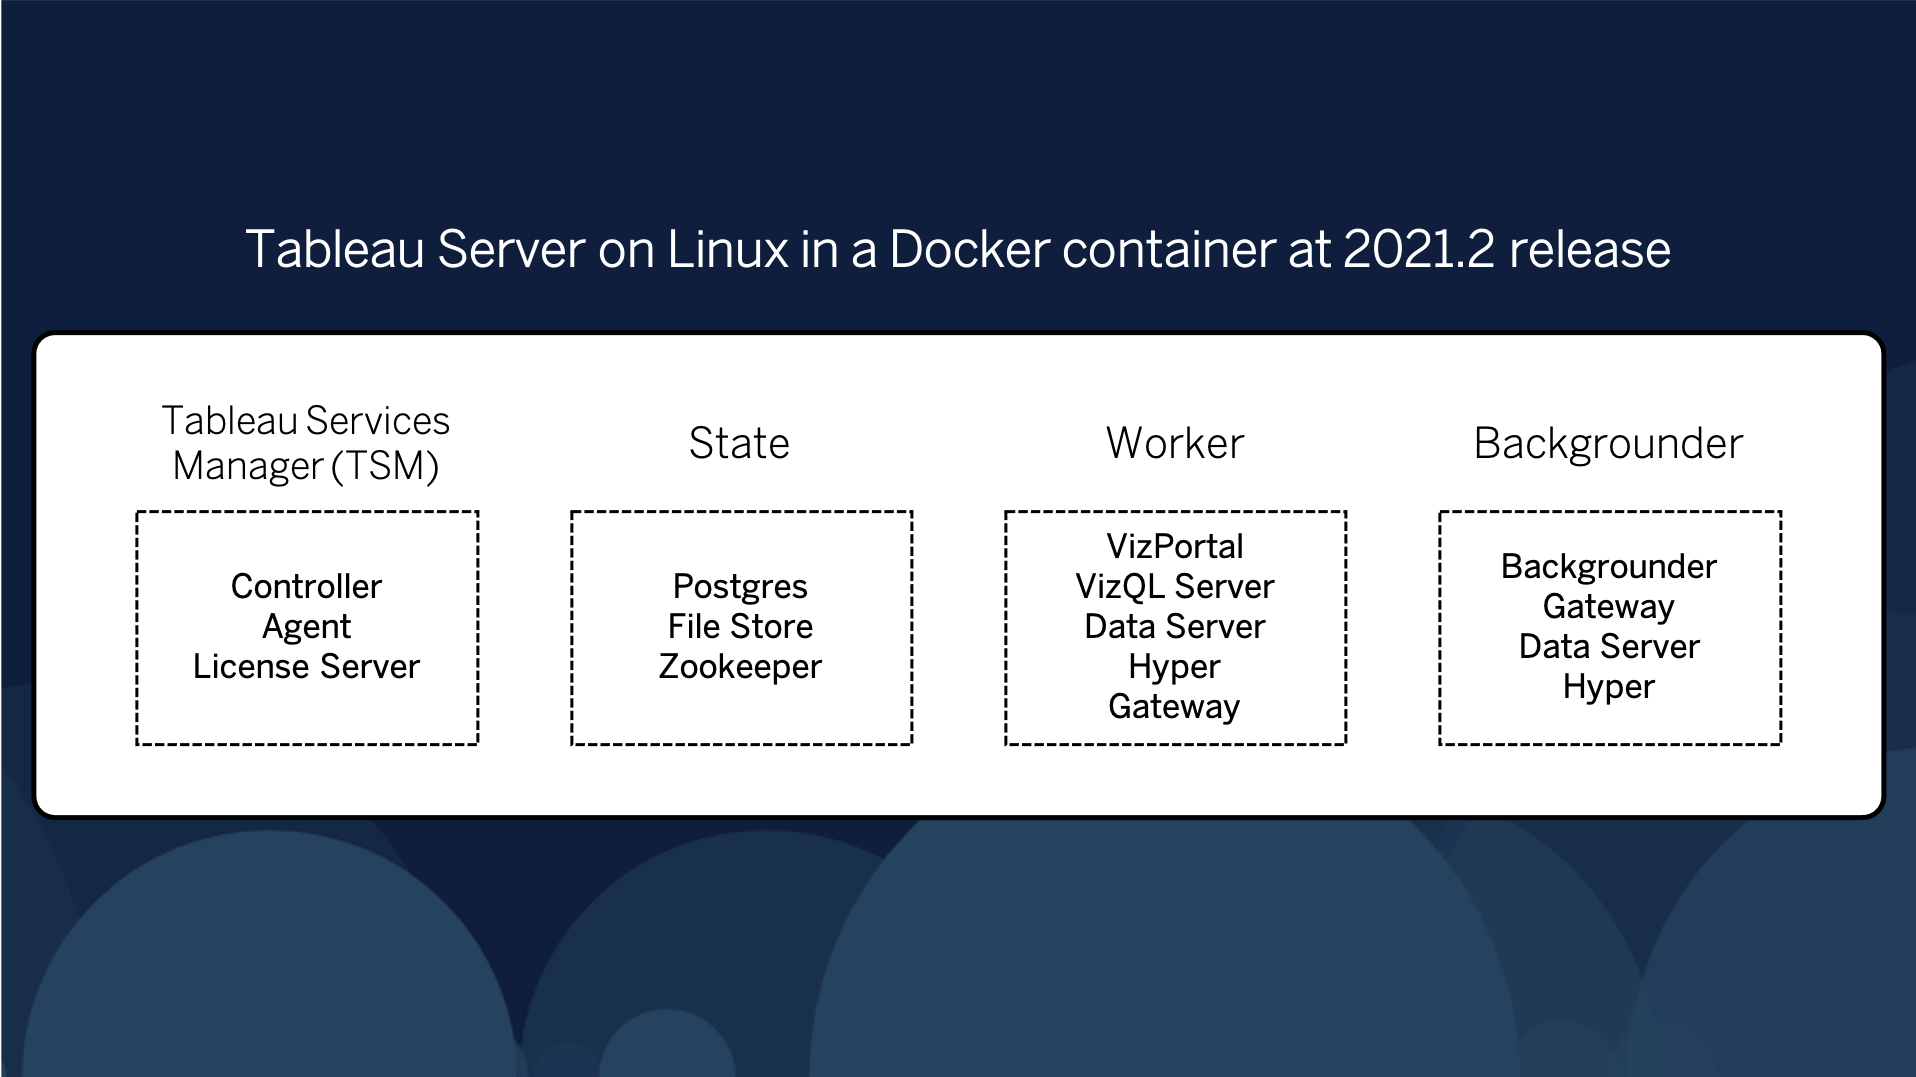 A diagram of Tableau Server on Linux in a Docker container at the 2021.2 release, showing the Tableau Services Manager, state, worker, and backgrounder services.